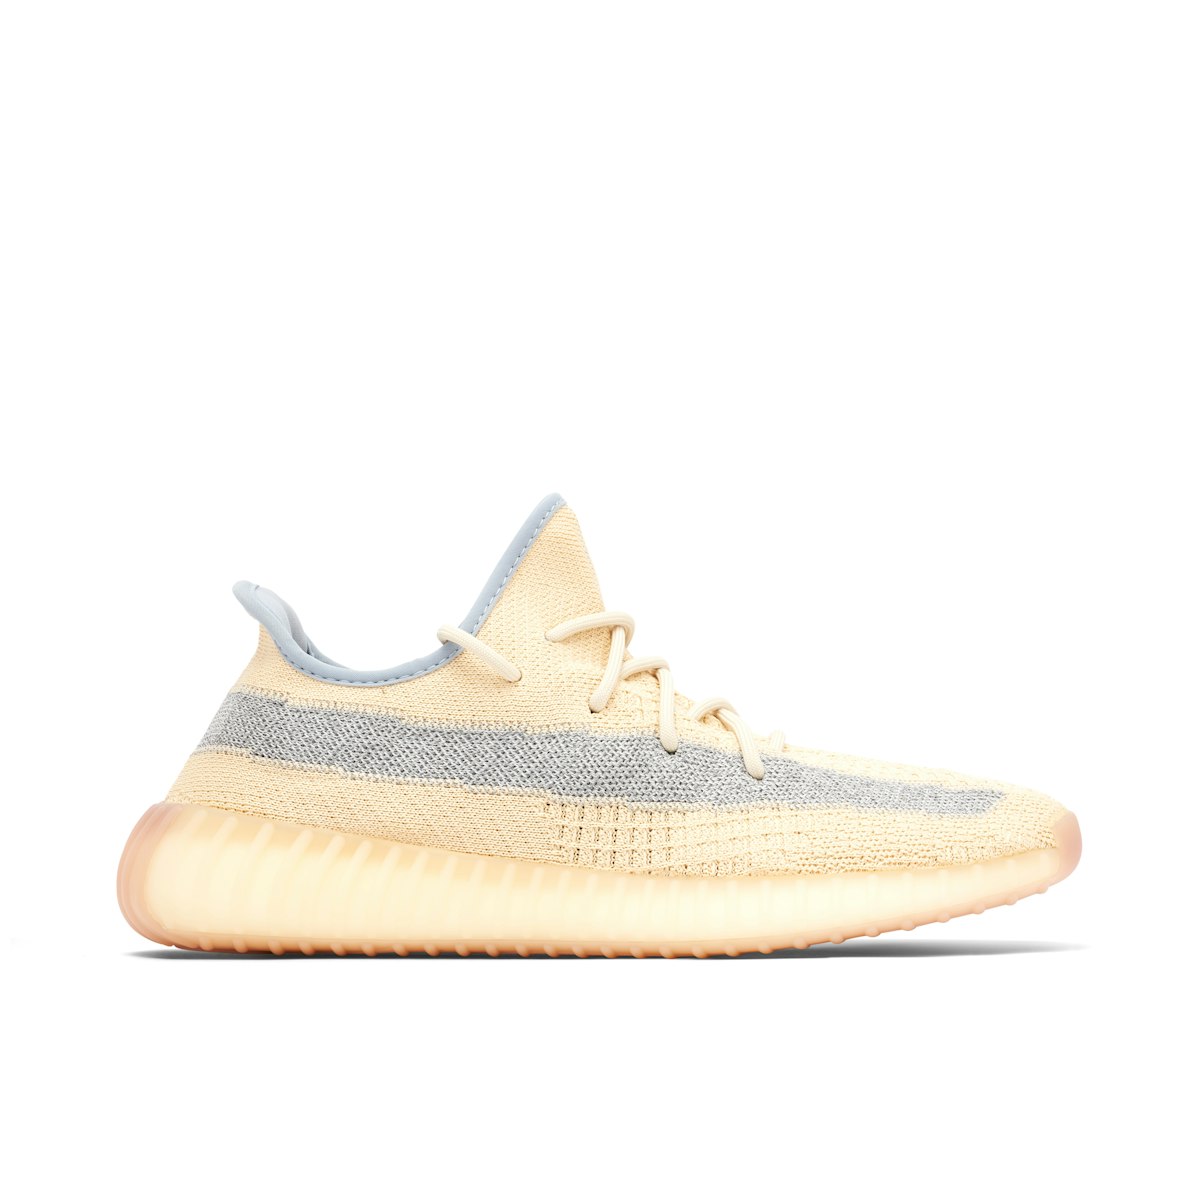 Adidas Yeezy Boost 350 V2 'Linen' Mens Sneakers - Size 7.5